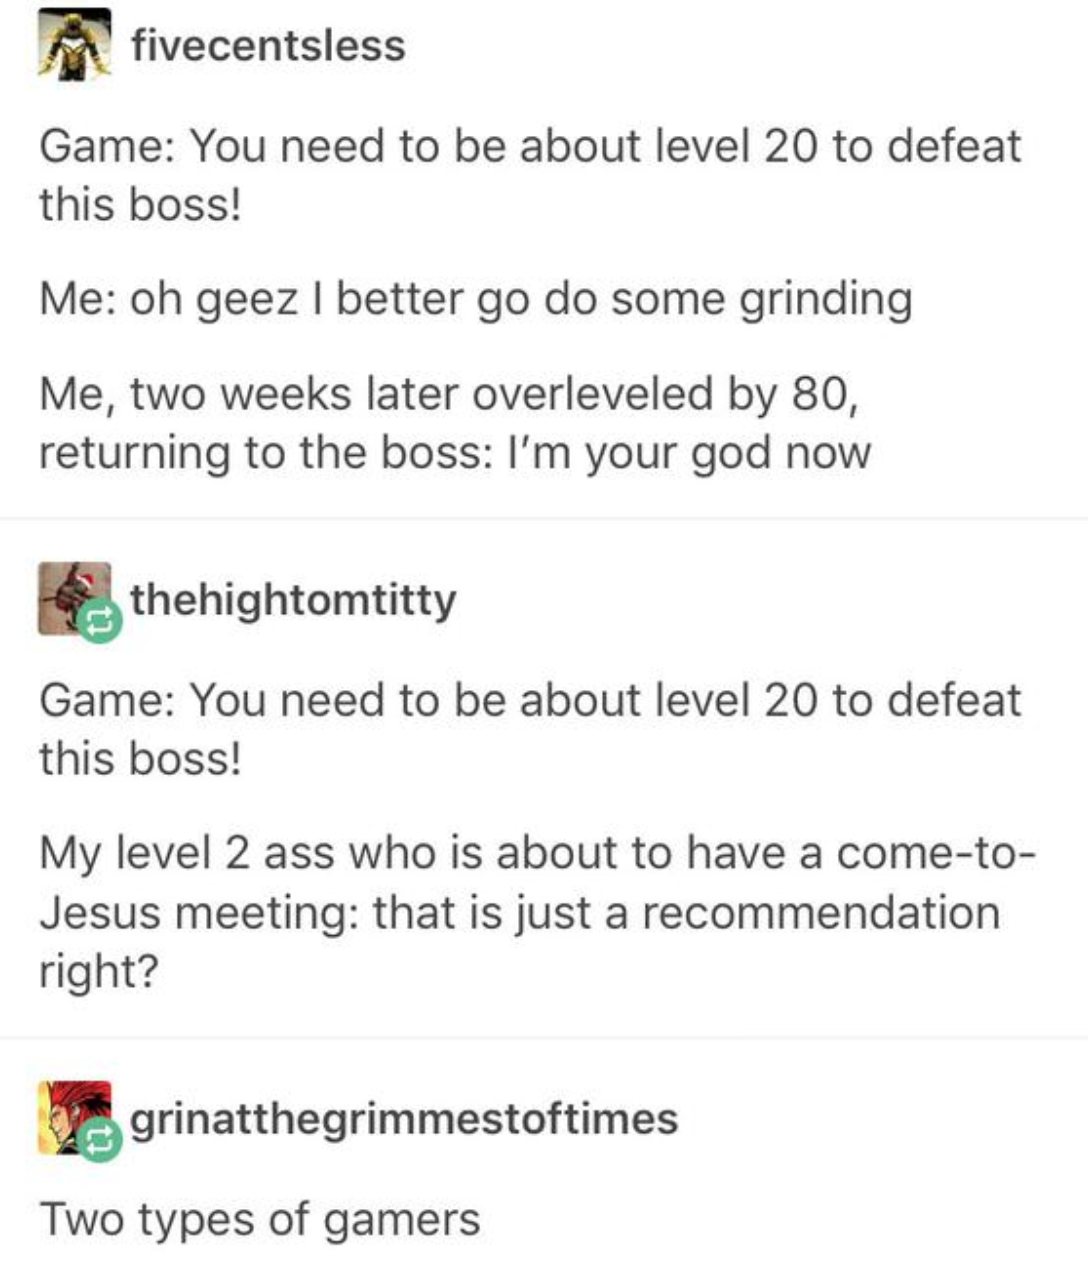 paper - fivecentsless Game You need to be about level 20 to defeat this boss! Me oh geez I better go do some grinding Me, two weeks later overleveled by 80, returning to the boss I'm your god now thehightomtitty Game You need to be about level 20 to defea